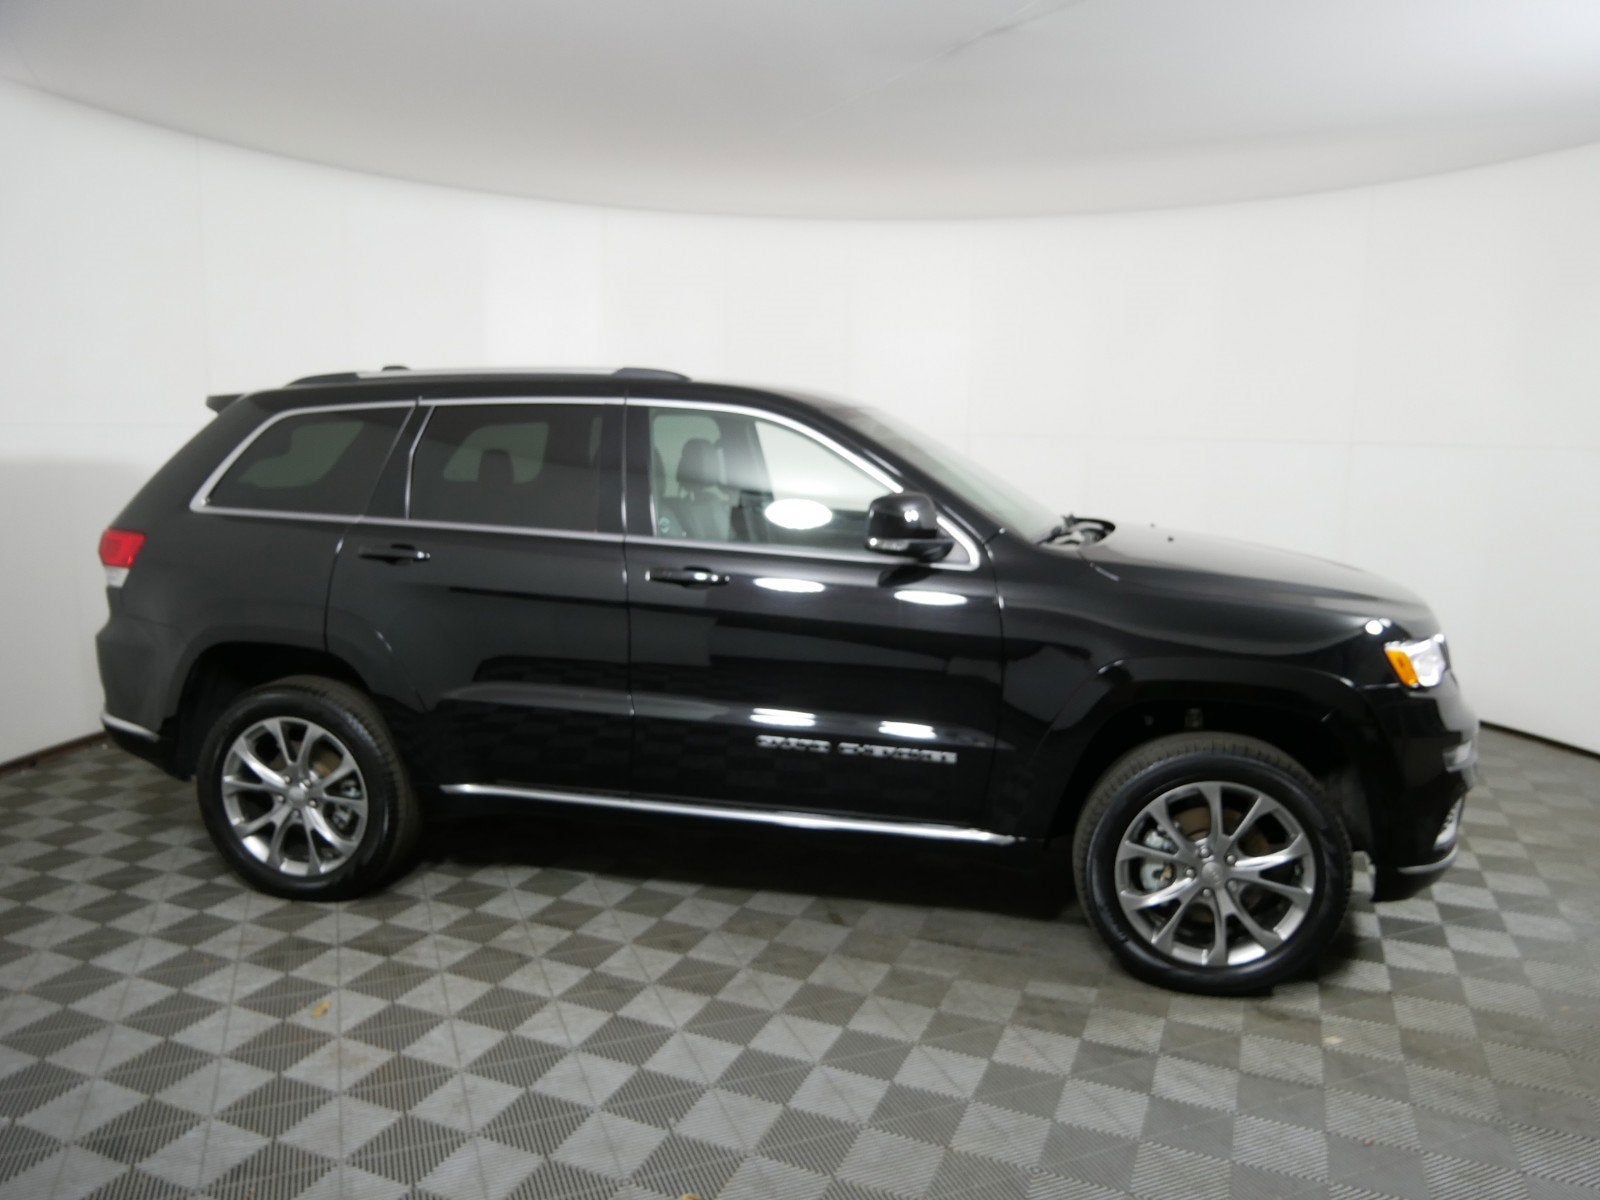 Used 2021 Jeep Grand Cherokee Summit with VIN 1C4RJFJG3MC880344 for sale in Minneapolis, Minnesota